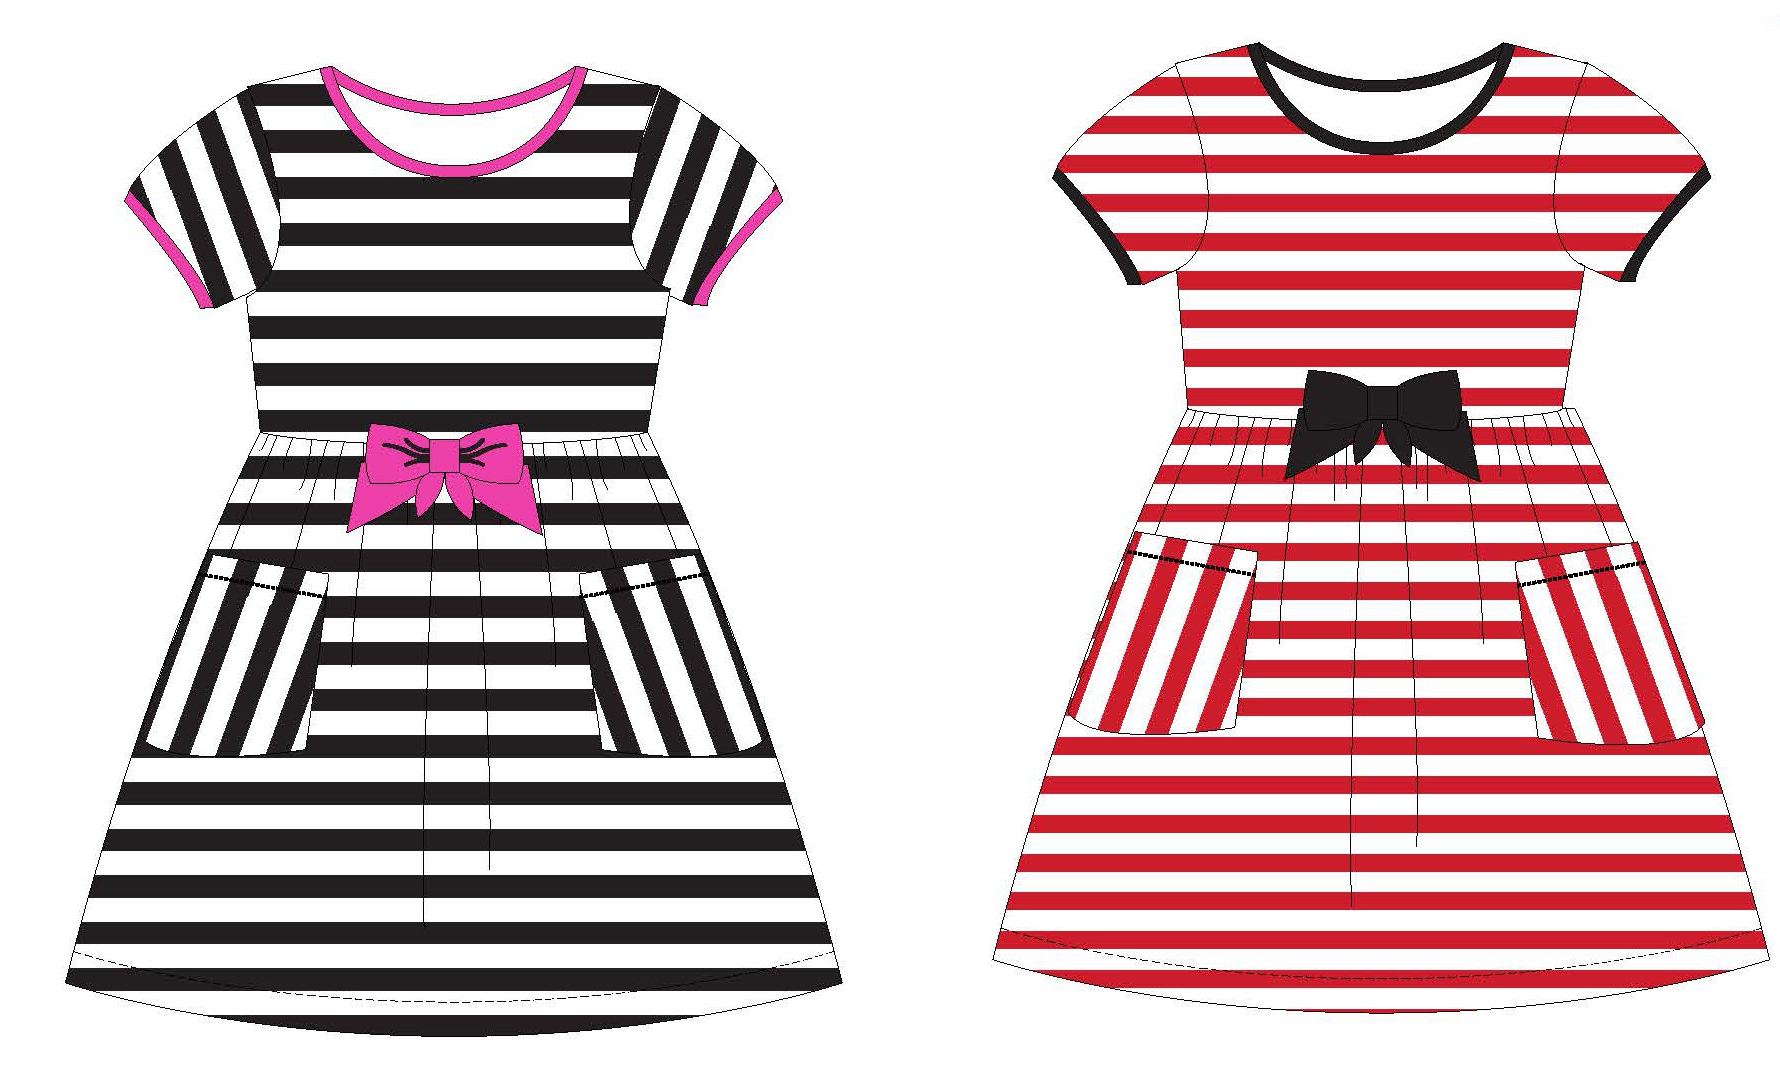 Toddler Girl's Short-Sleeved Stripped Knit DRESS w/ Embroidered Ribbon Bow - Size 2T-4T